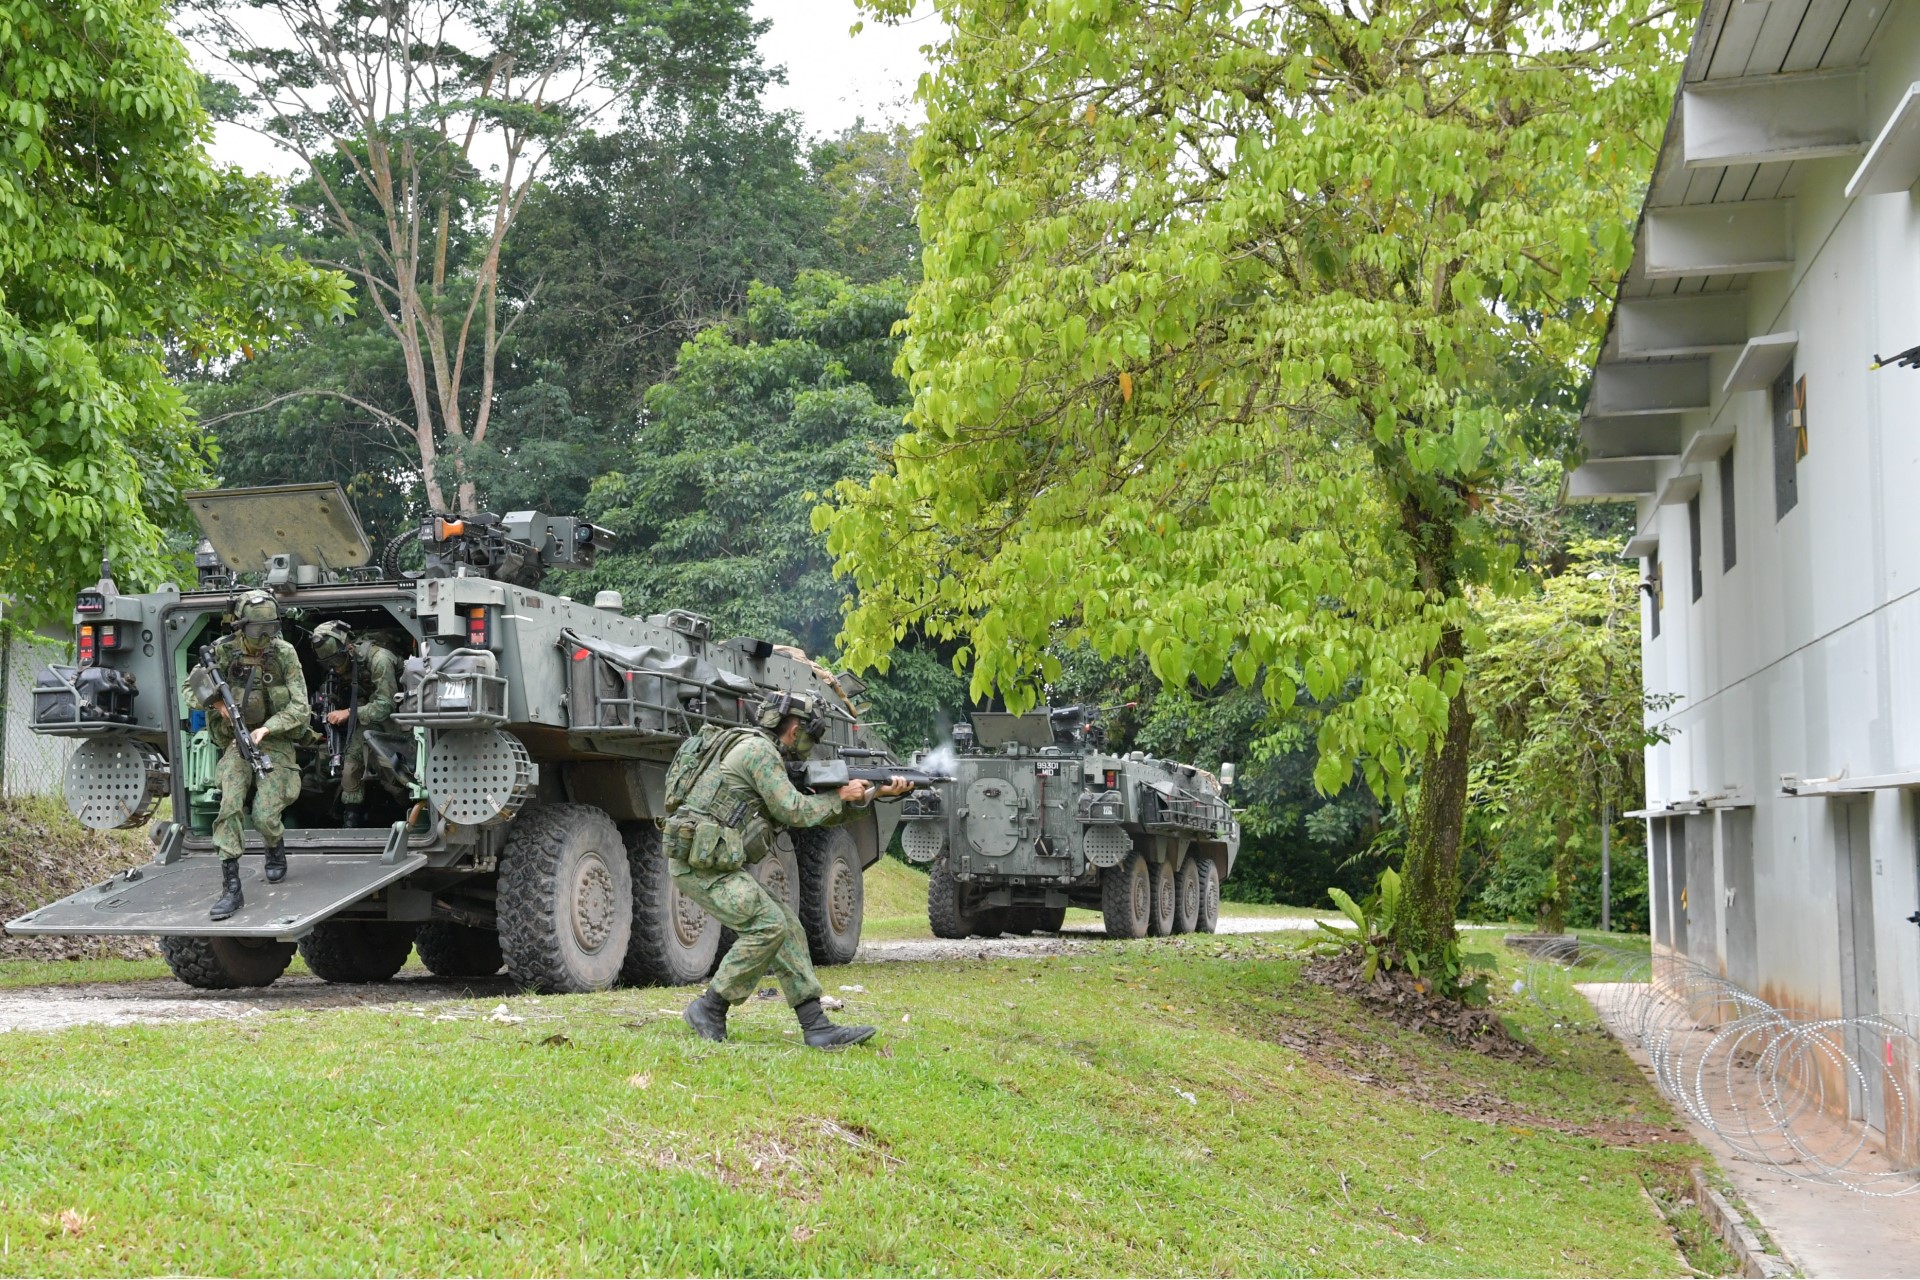 SAF personnel dismounting from a Terrex Infantry Carrier Vehicle.